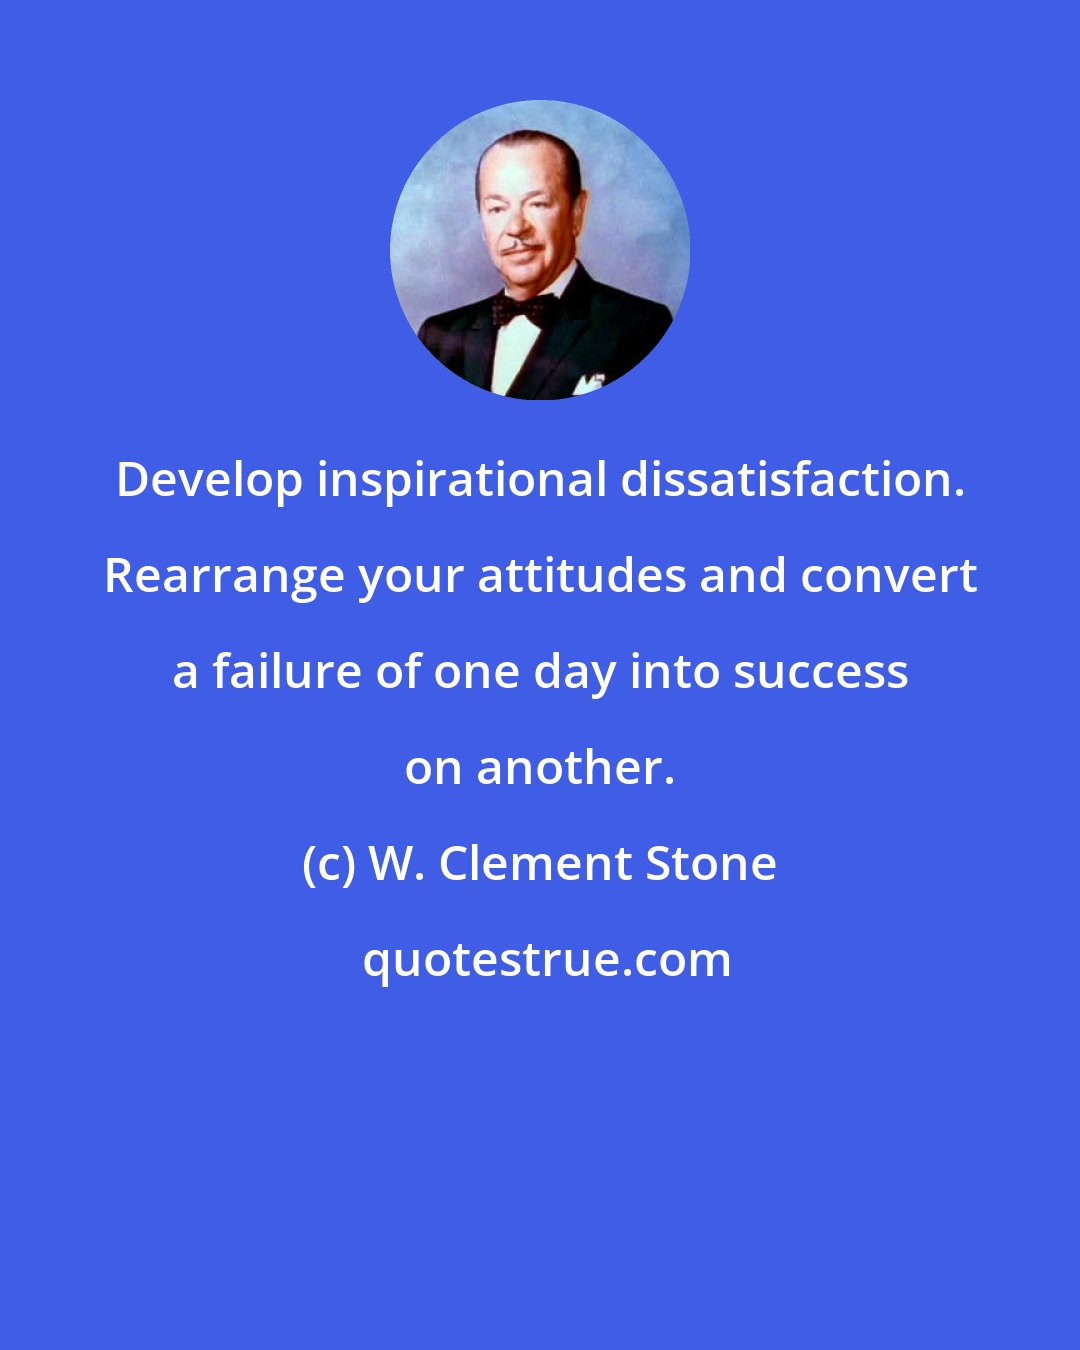 W. Clement Stone: Develop inspirational dissatisfaction. Rearrange your attitudes and convert a failure of one day into success on another.